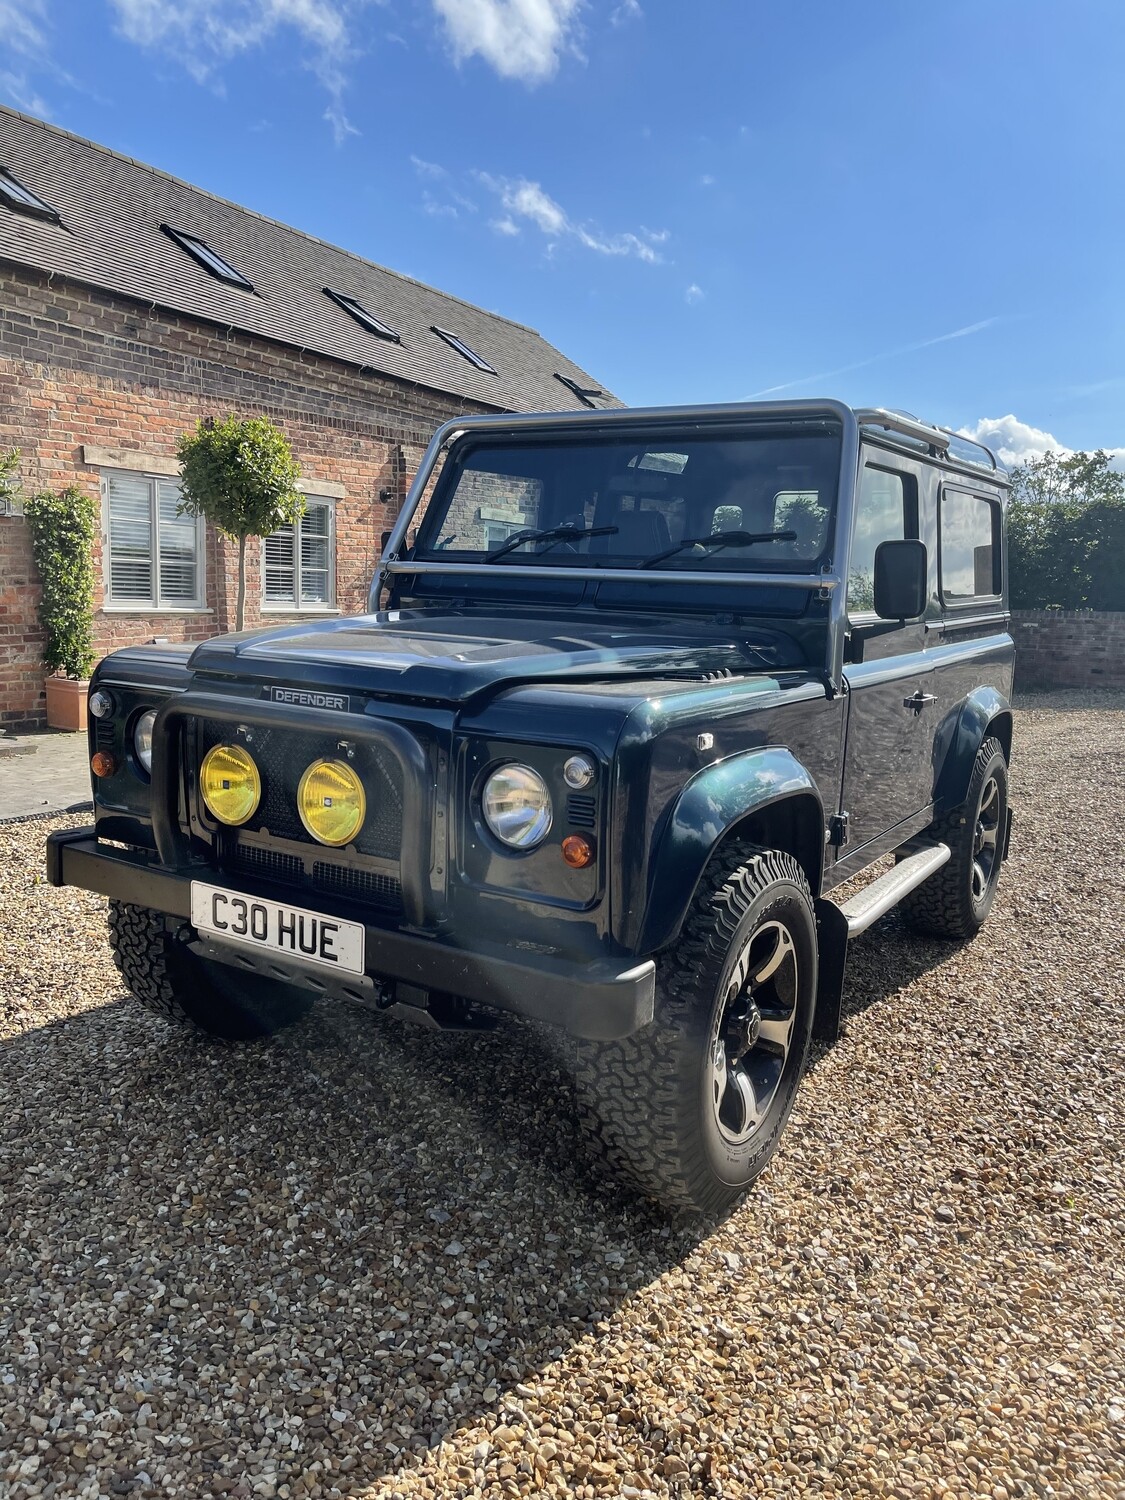 Limited Edition 50th Anniversary V8 Land Rover Defender 90 Automatic - For Sale